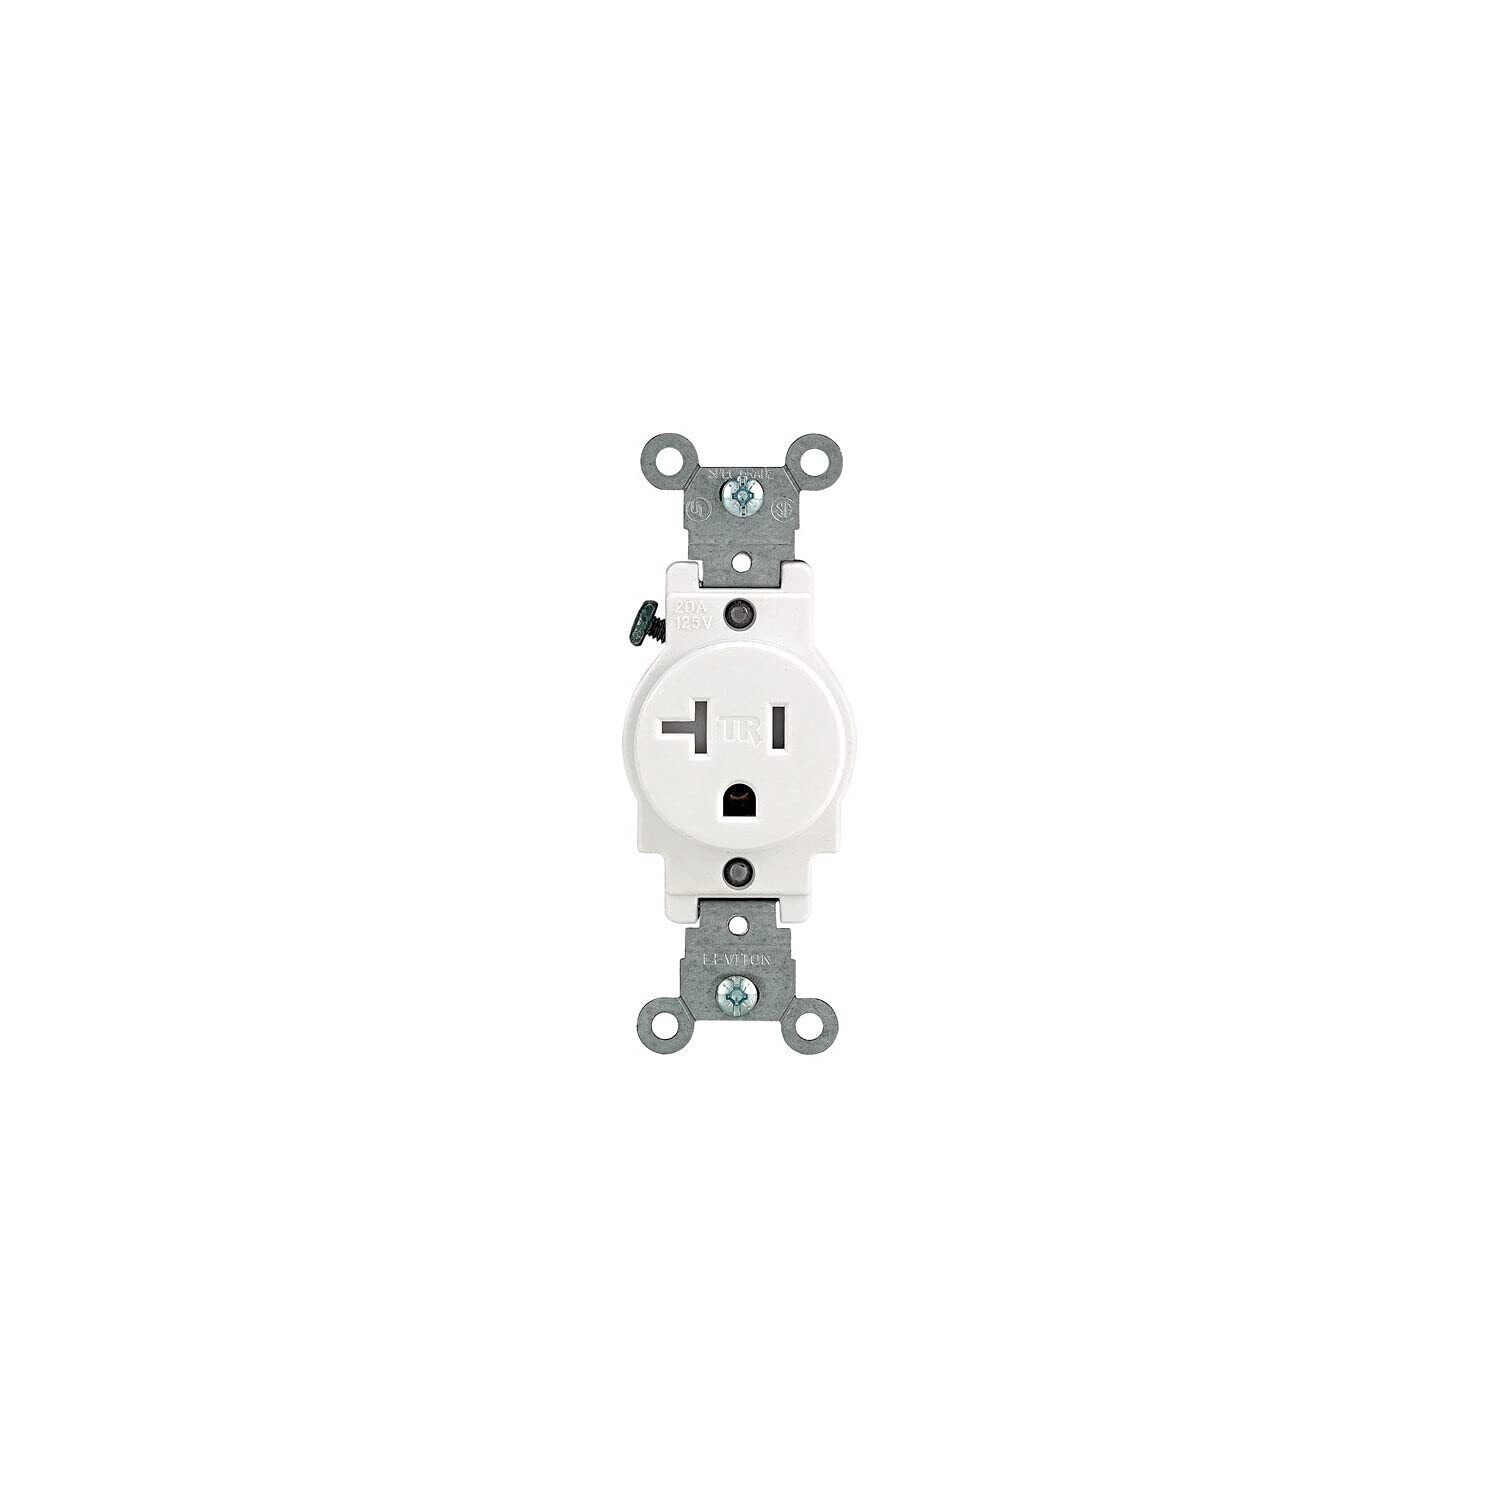 Leviton R52-T5020-0WS 20 Amp White Single Power Tamper Resistant Outlet